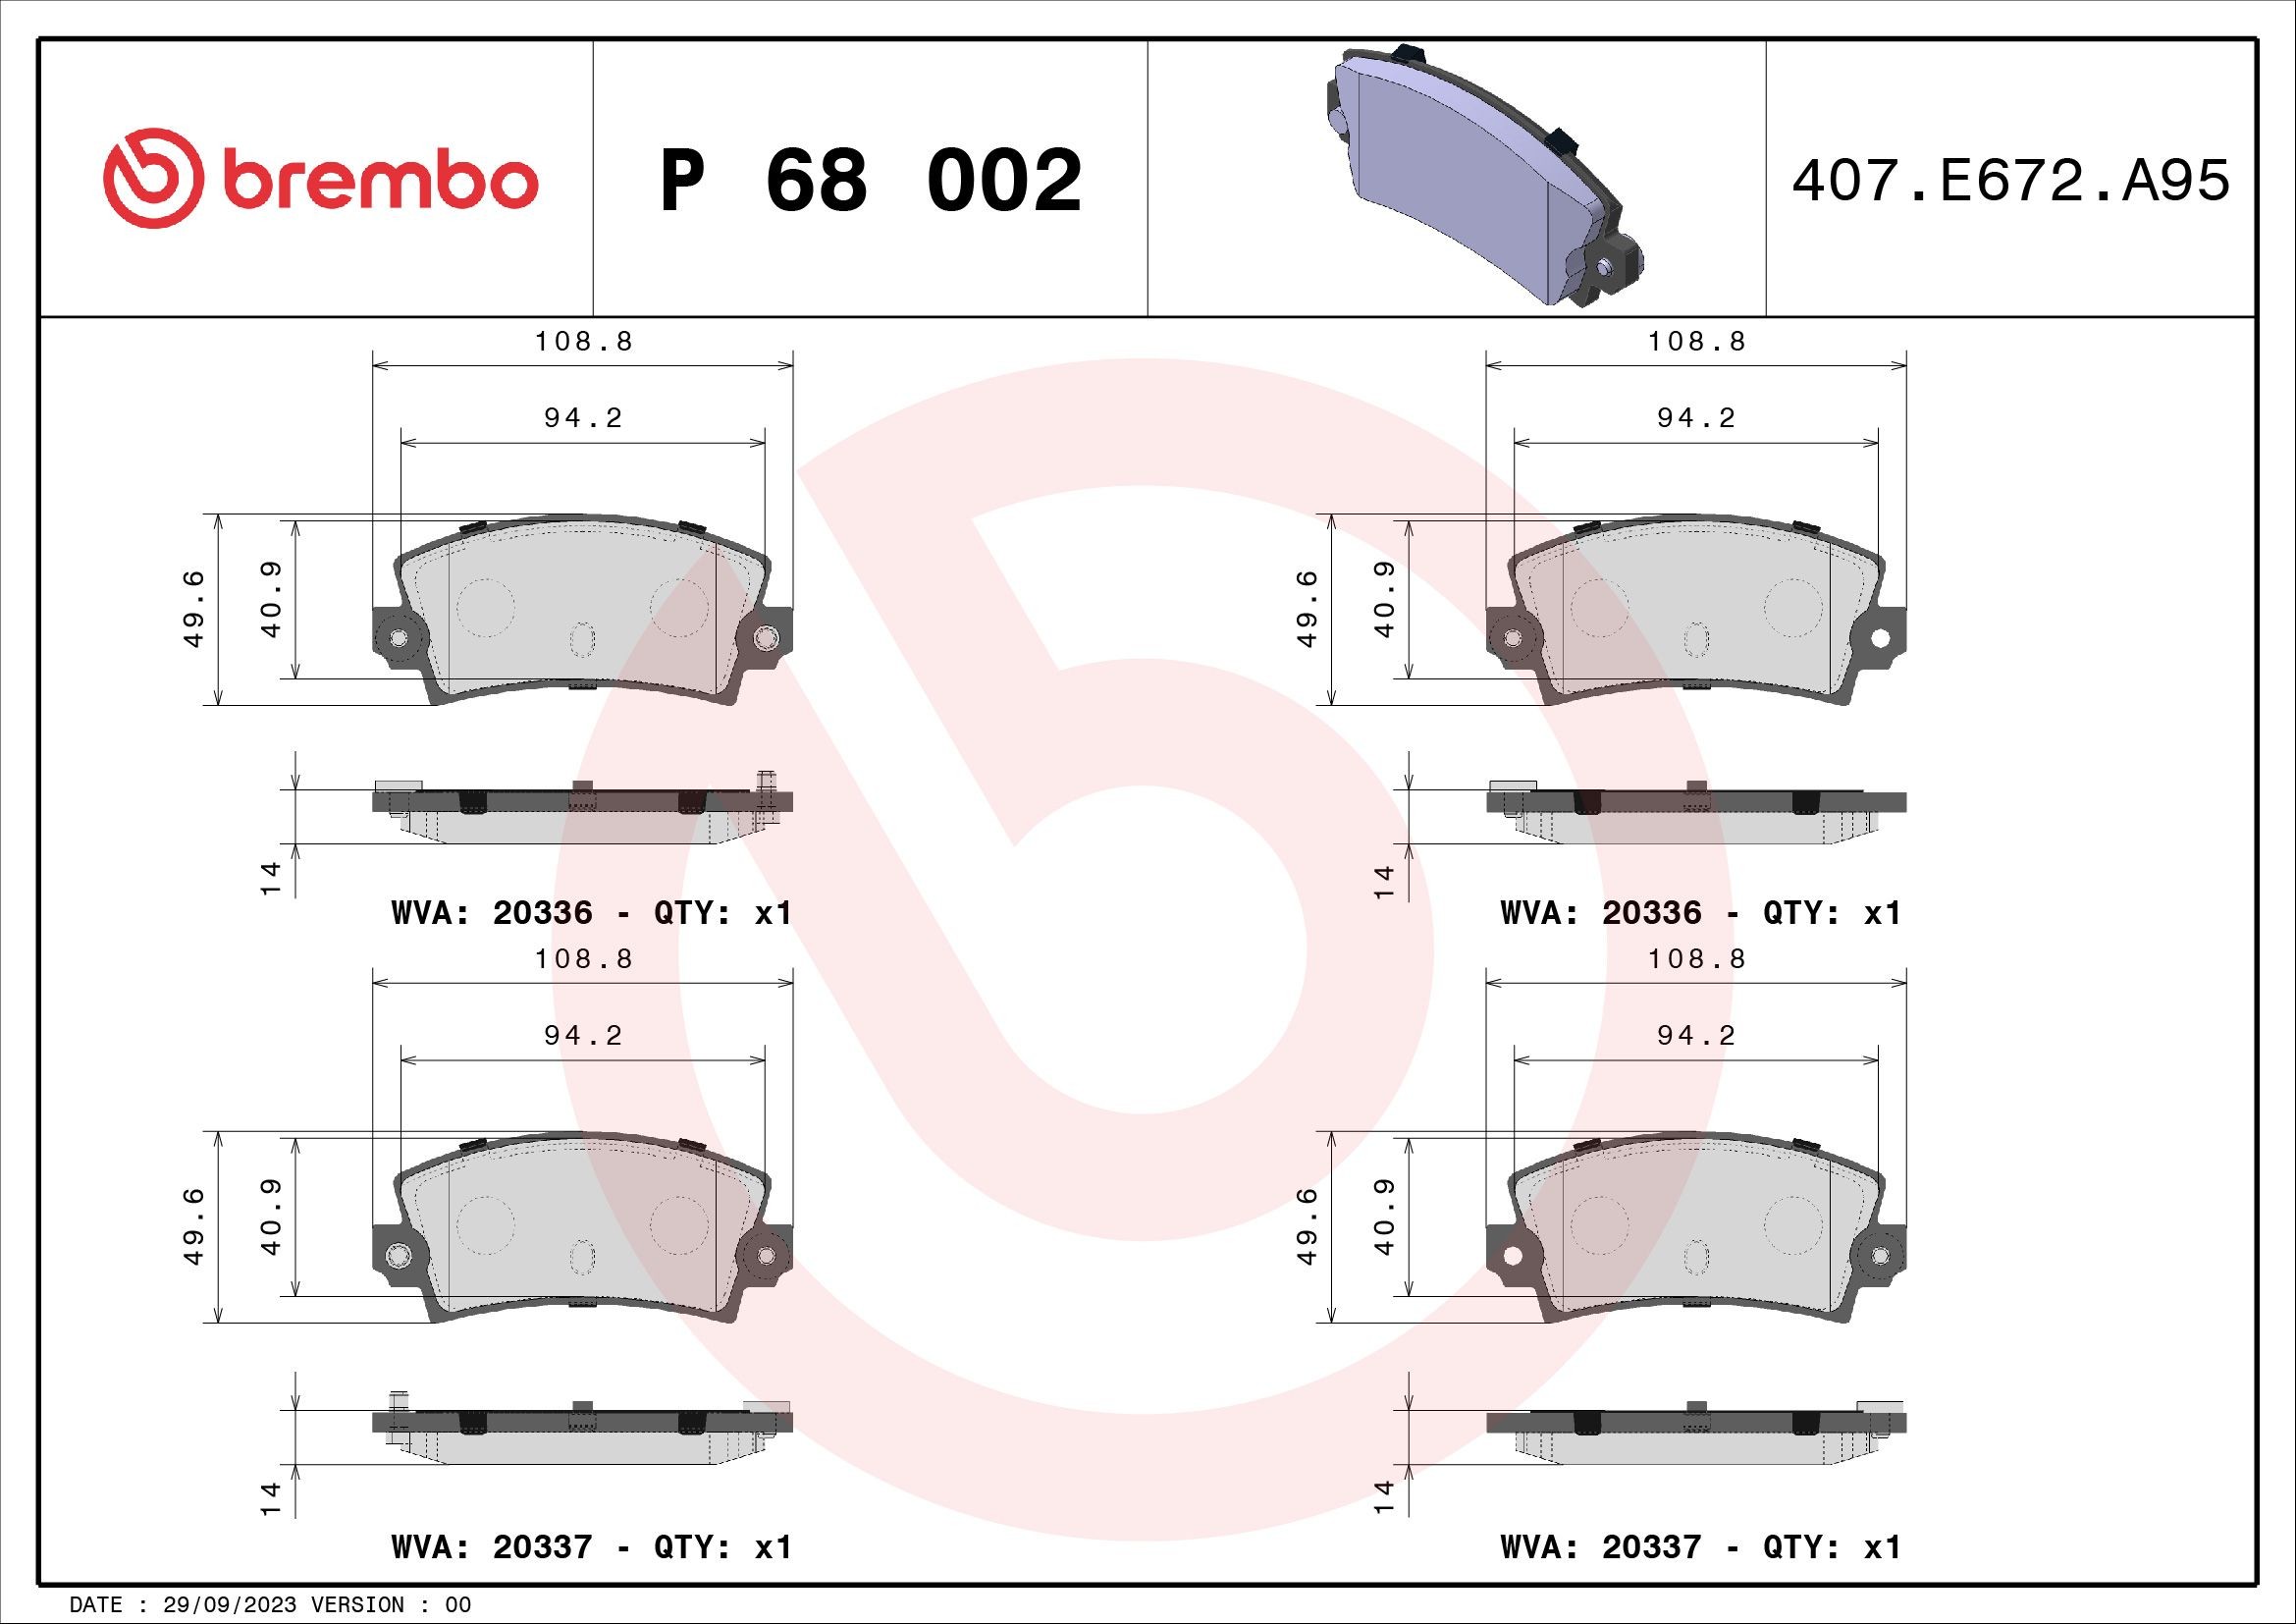 BREMBO P 68 002 Brake pad set with acoustic wear warning, without accessories